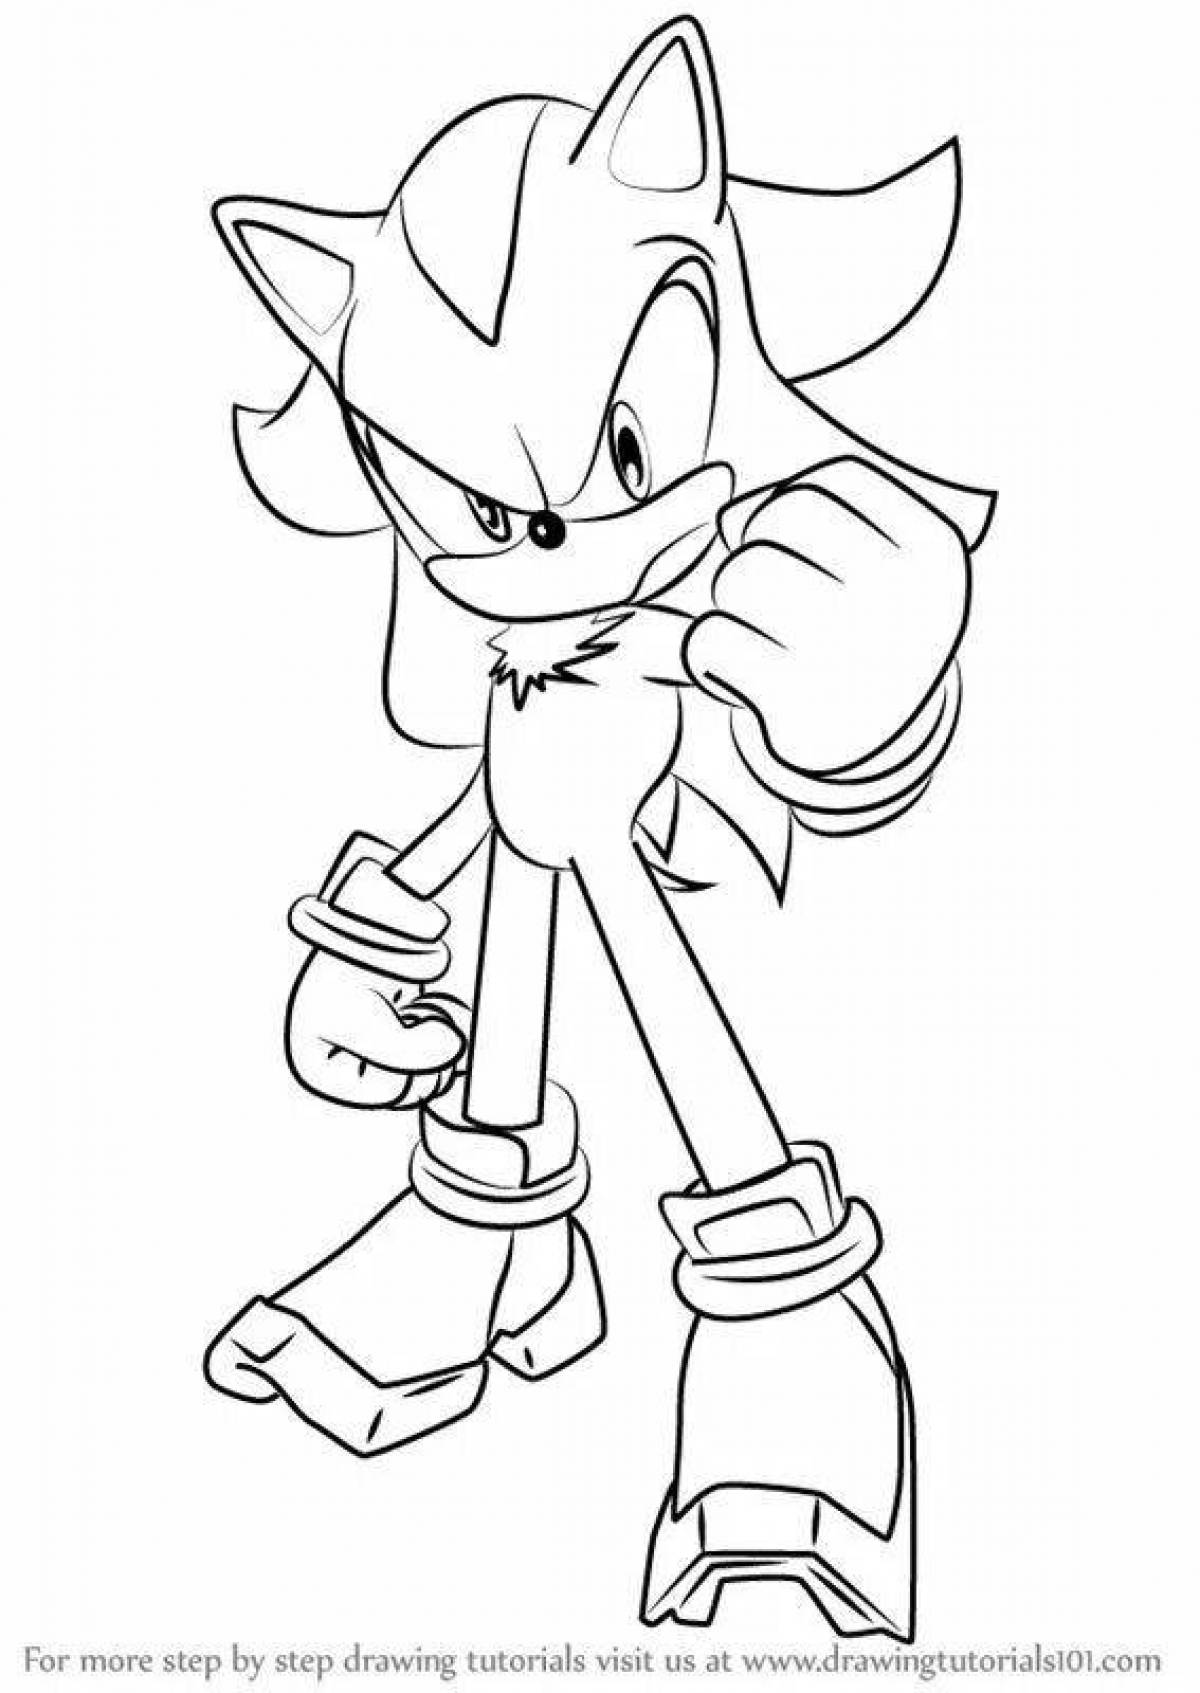 Shine shadow coloring page